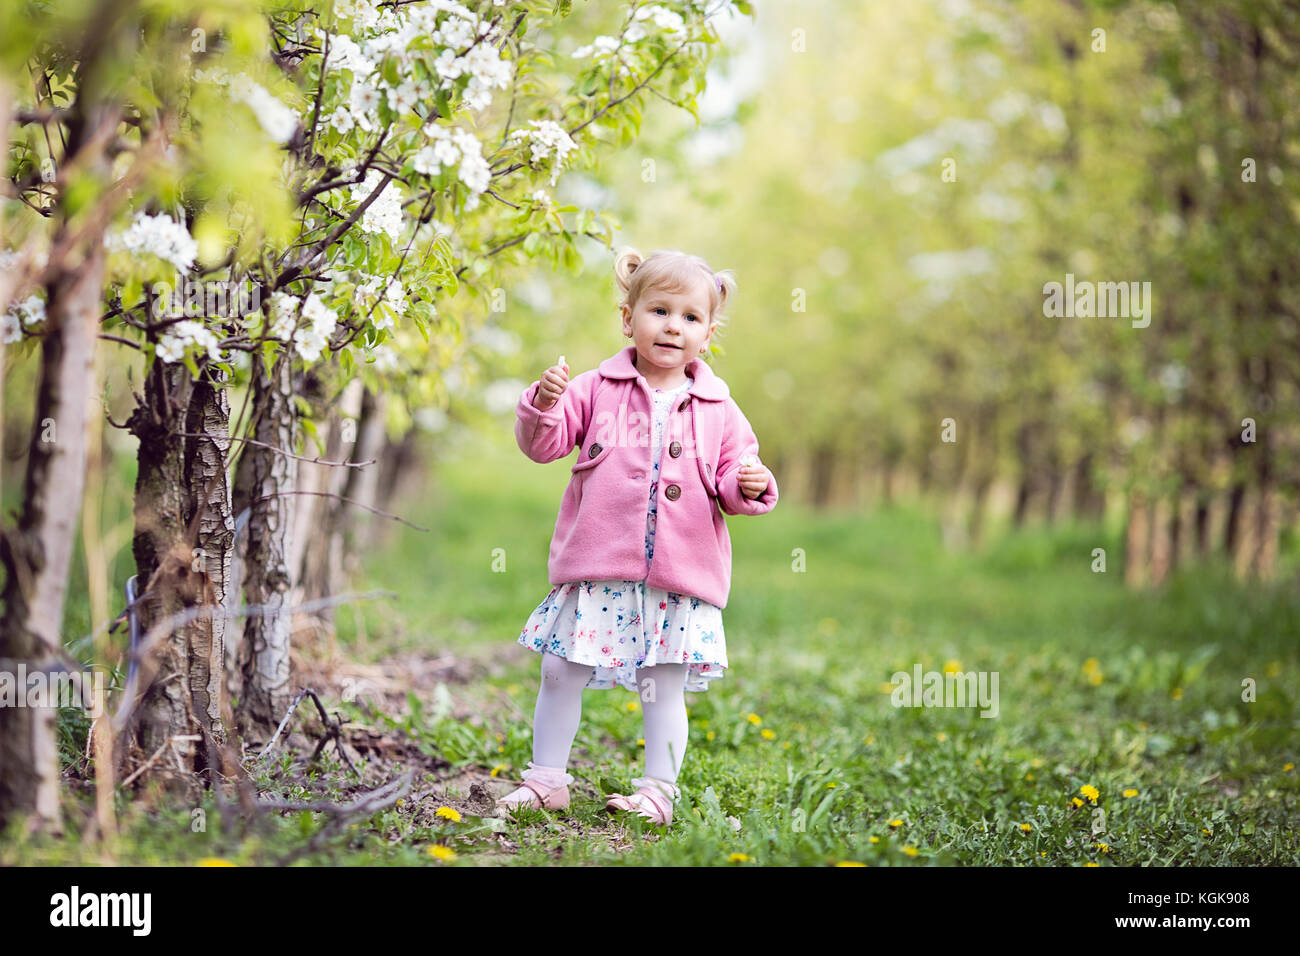 Cute little blond girl standing in orchard next to a small apple tree in bloom, holding apple tree flower Stock Photo